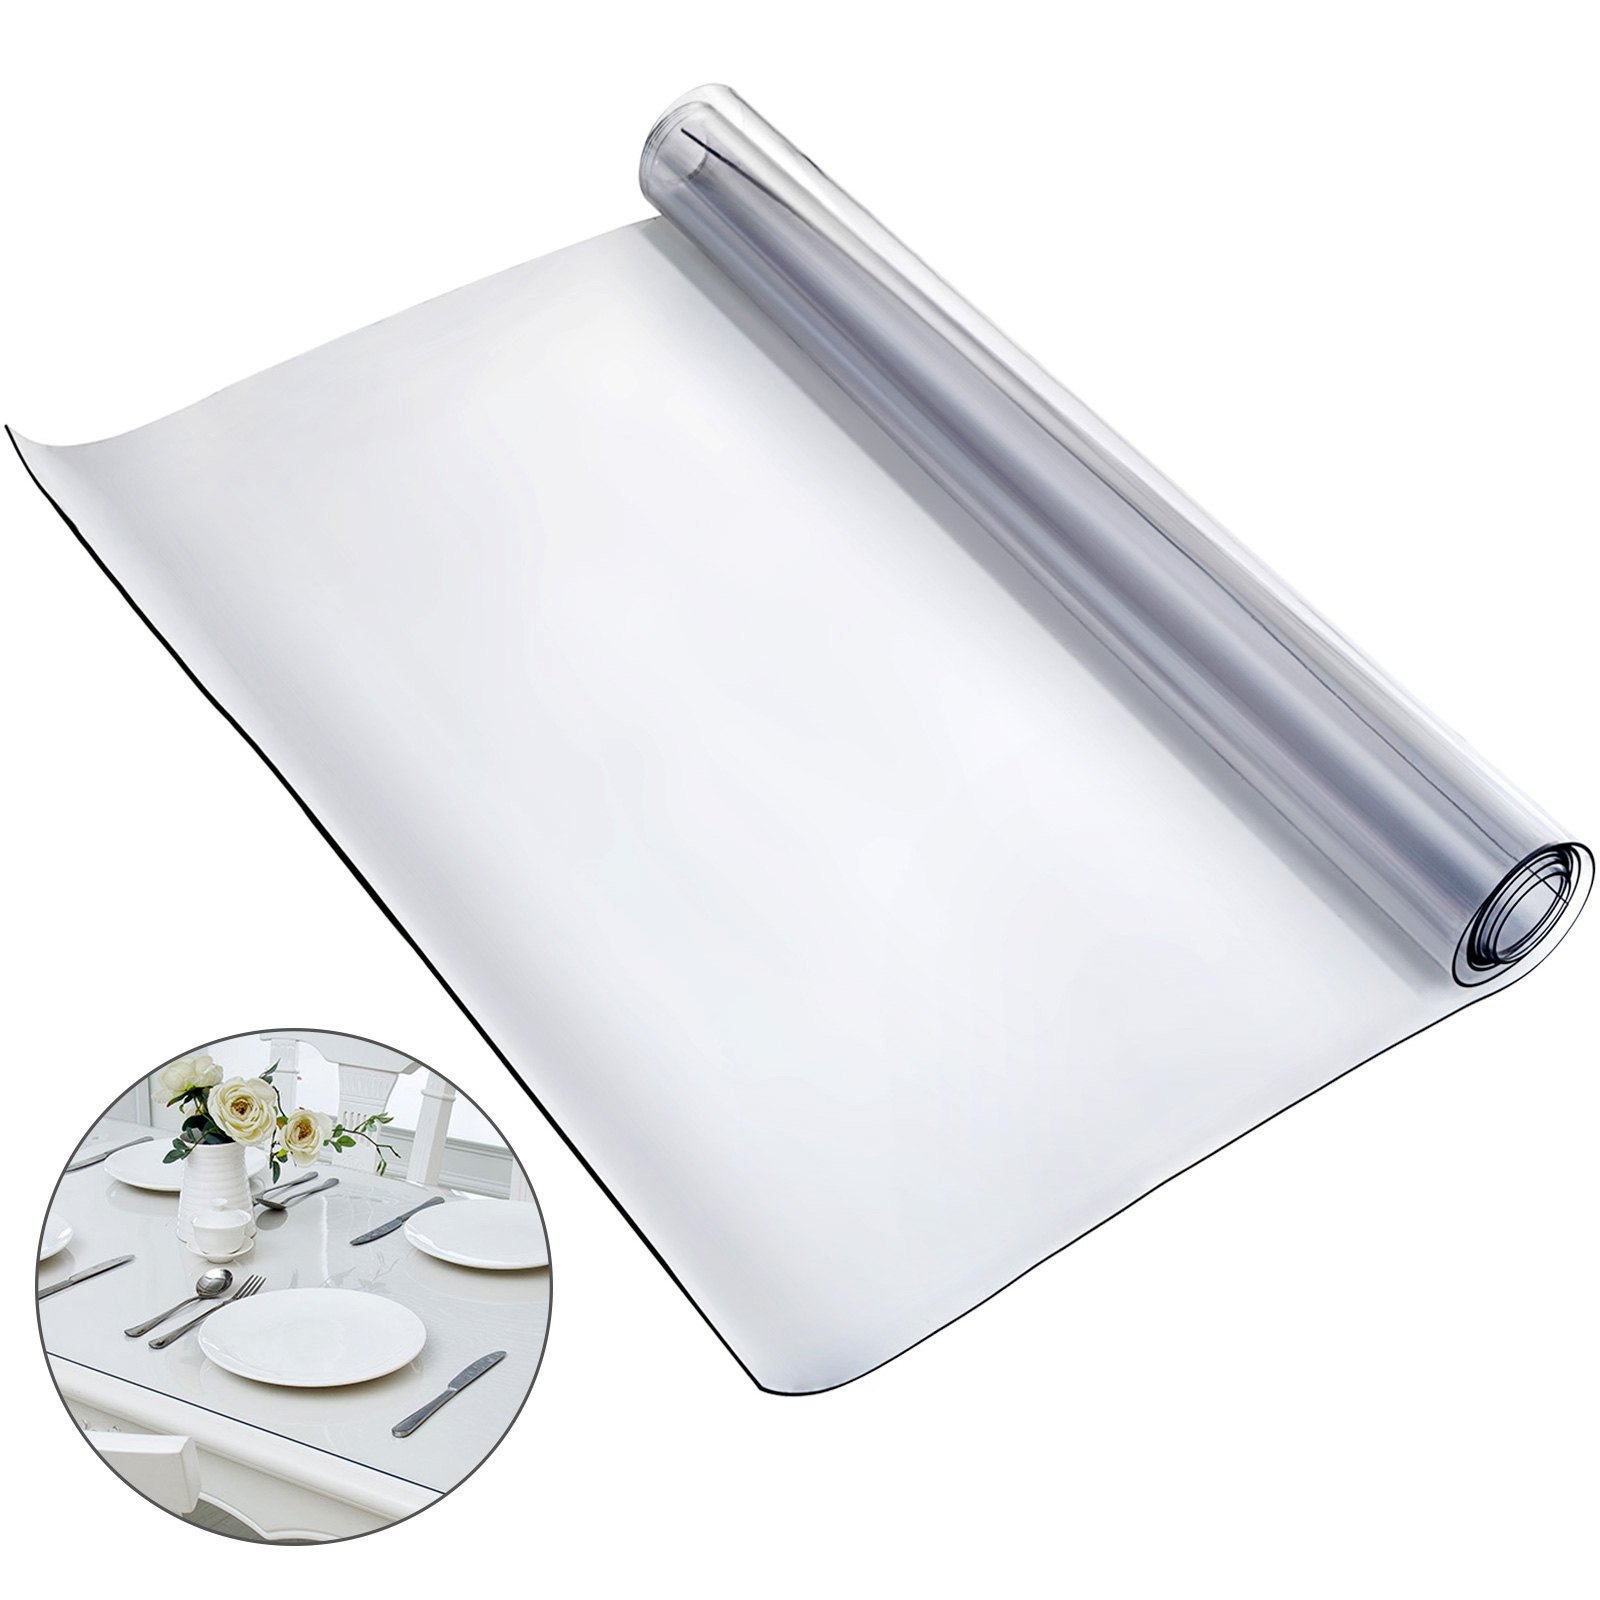 46" X 72" Pvc Table Protector Transparent Tablecloth Waterproof Soft Glass Mat от Vevor Many GEOs